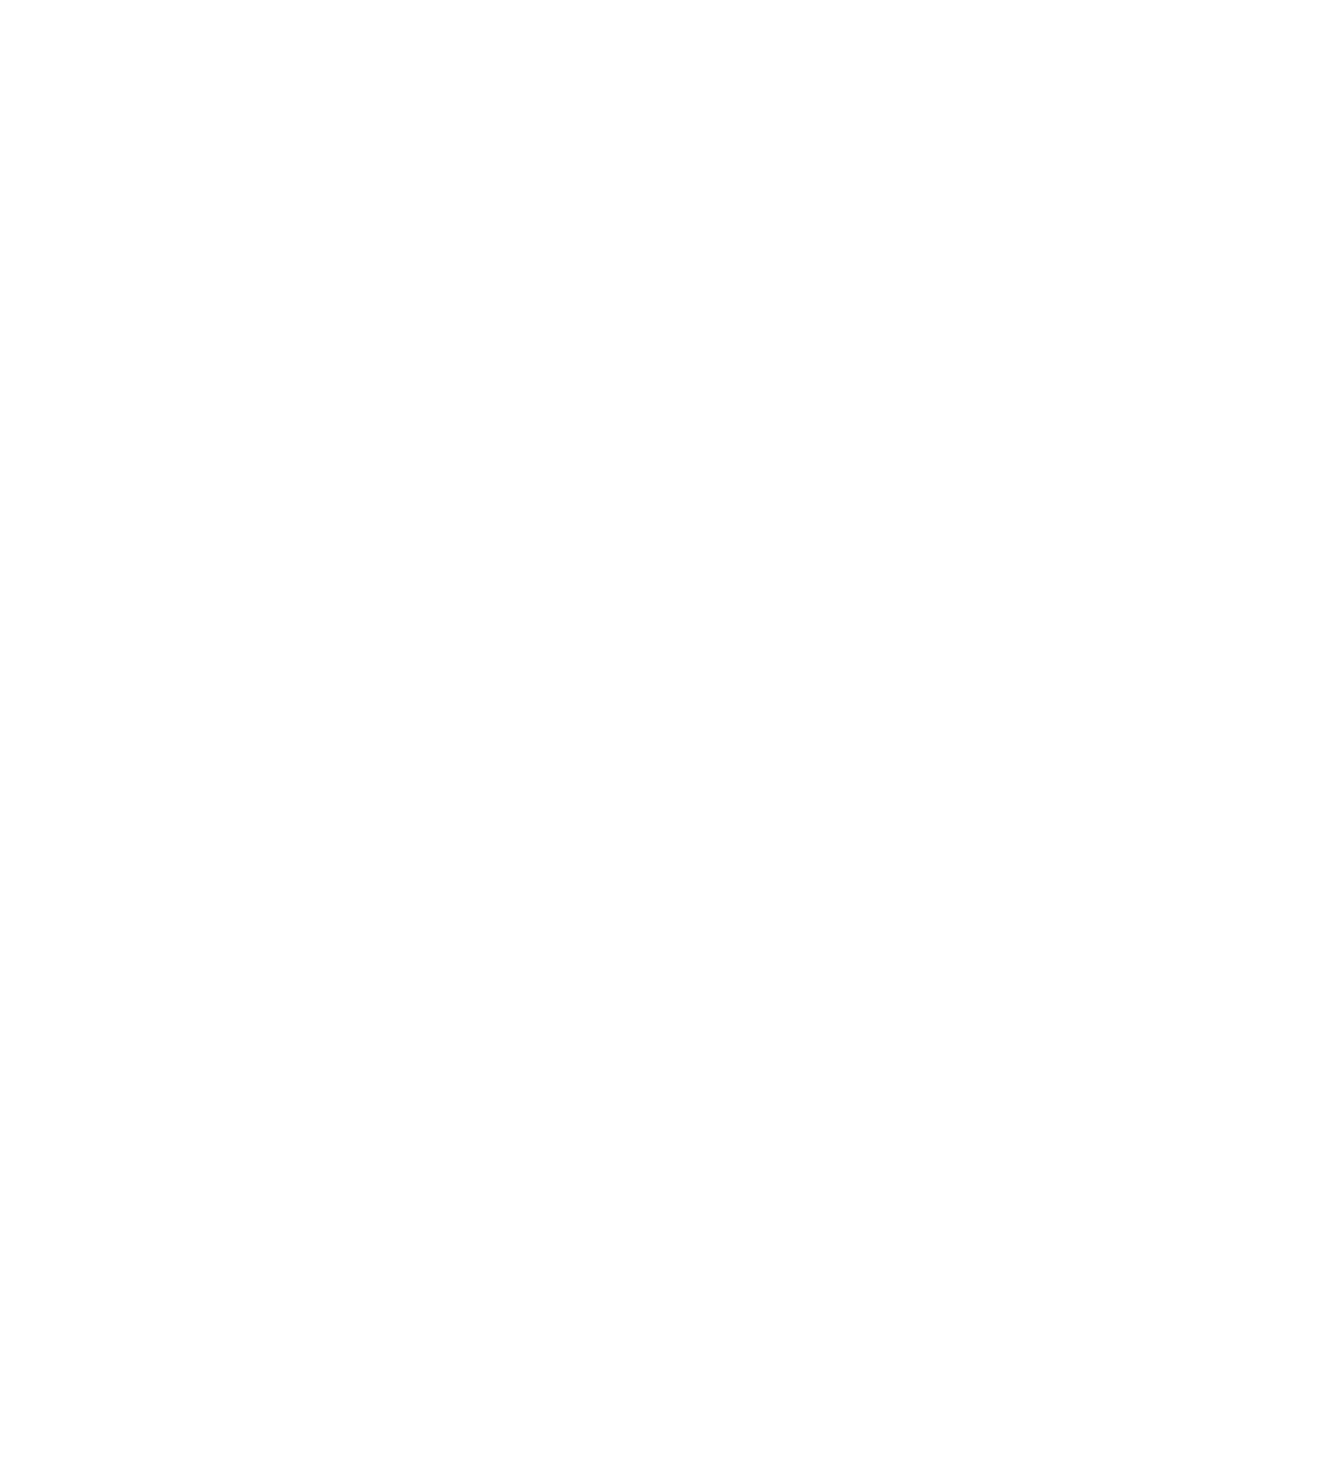 GO GREEN CARDBOARD RECYCLE THANK YOU FOR RECYCLING